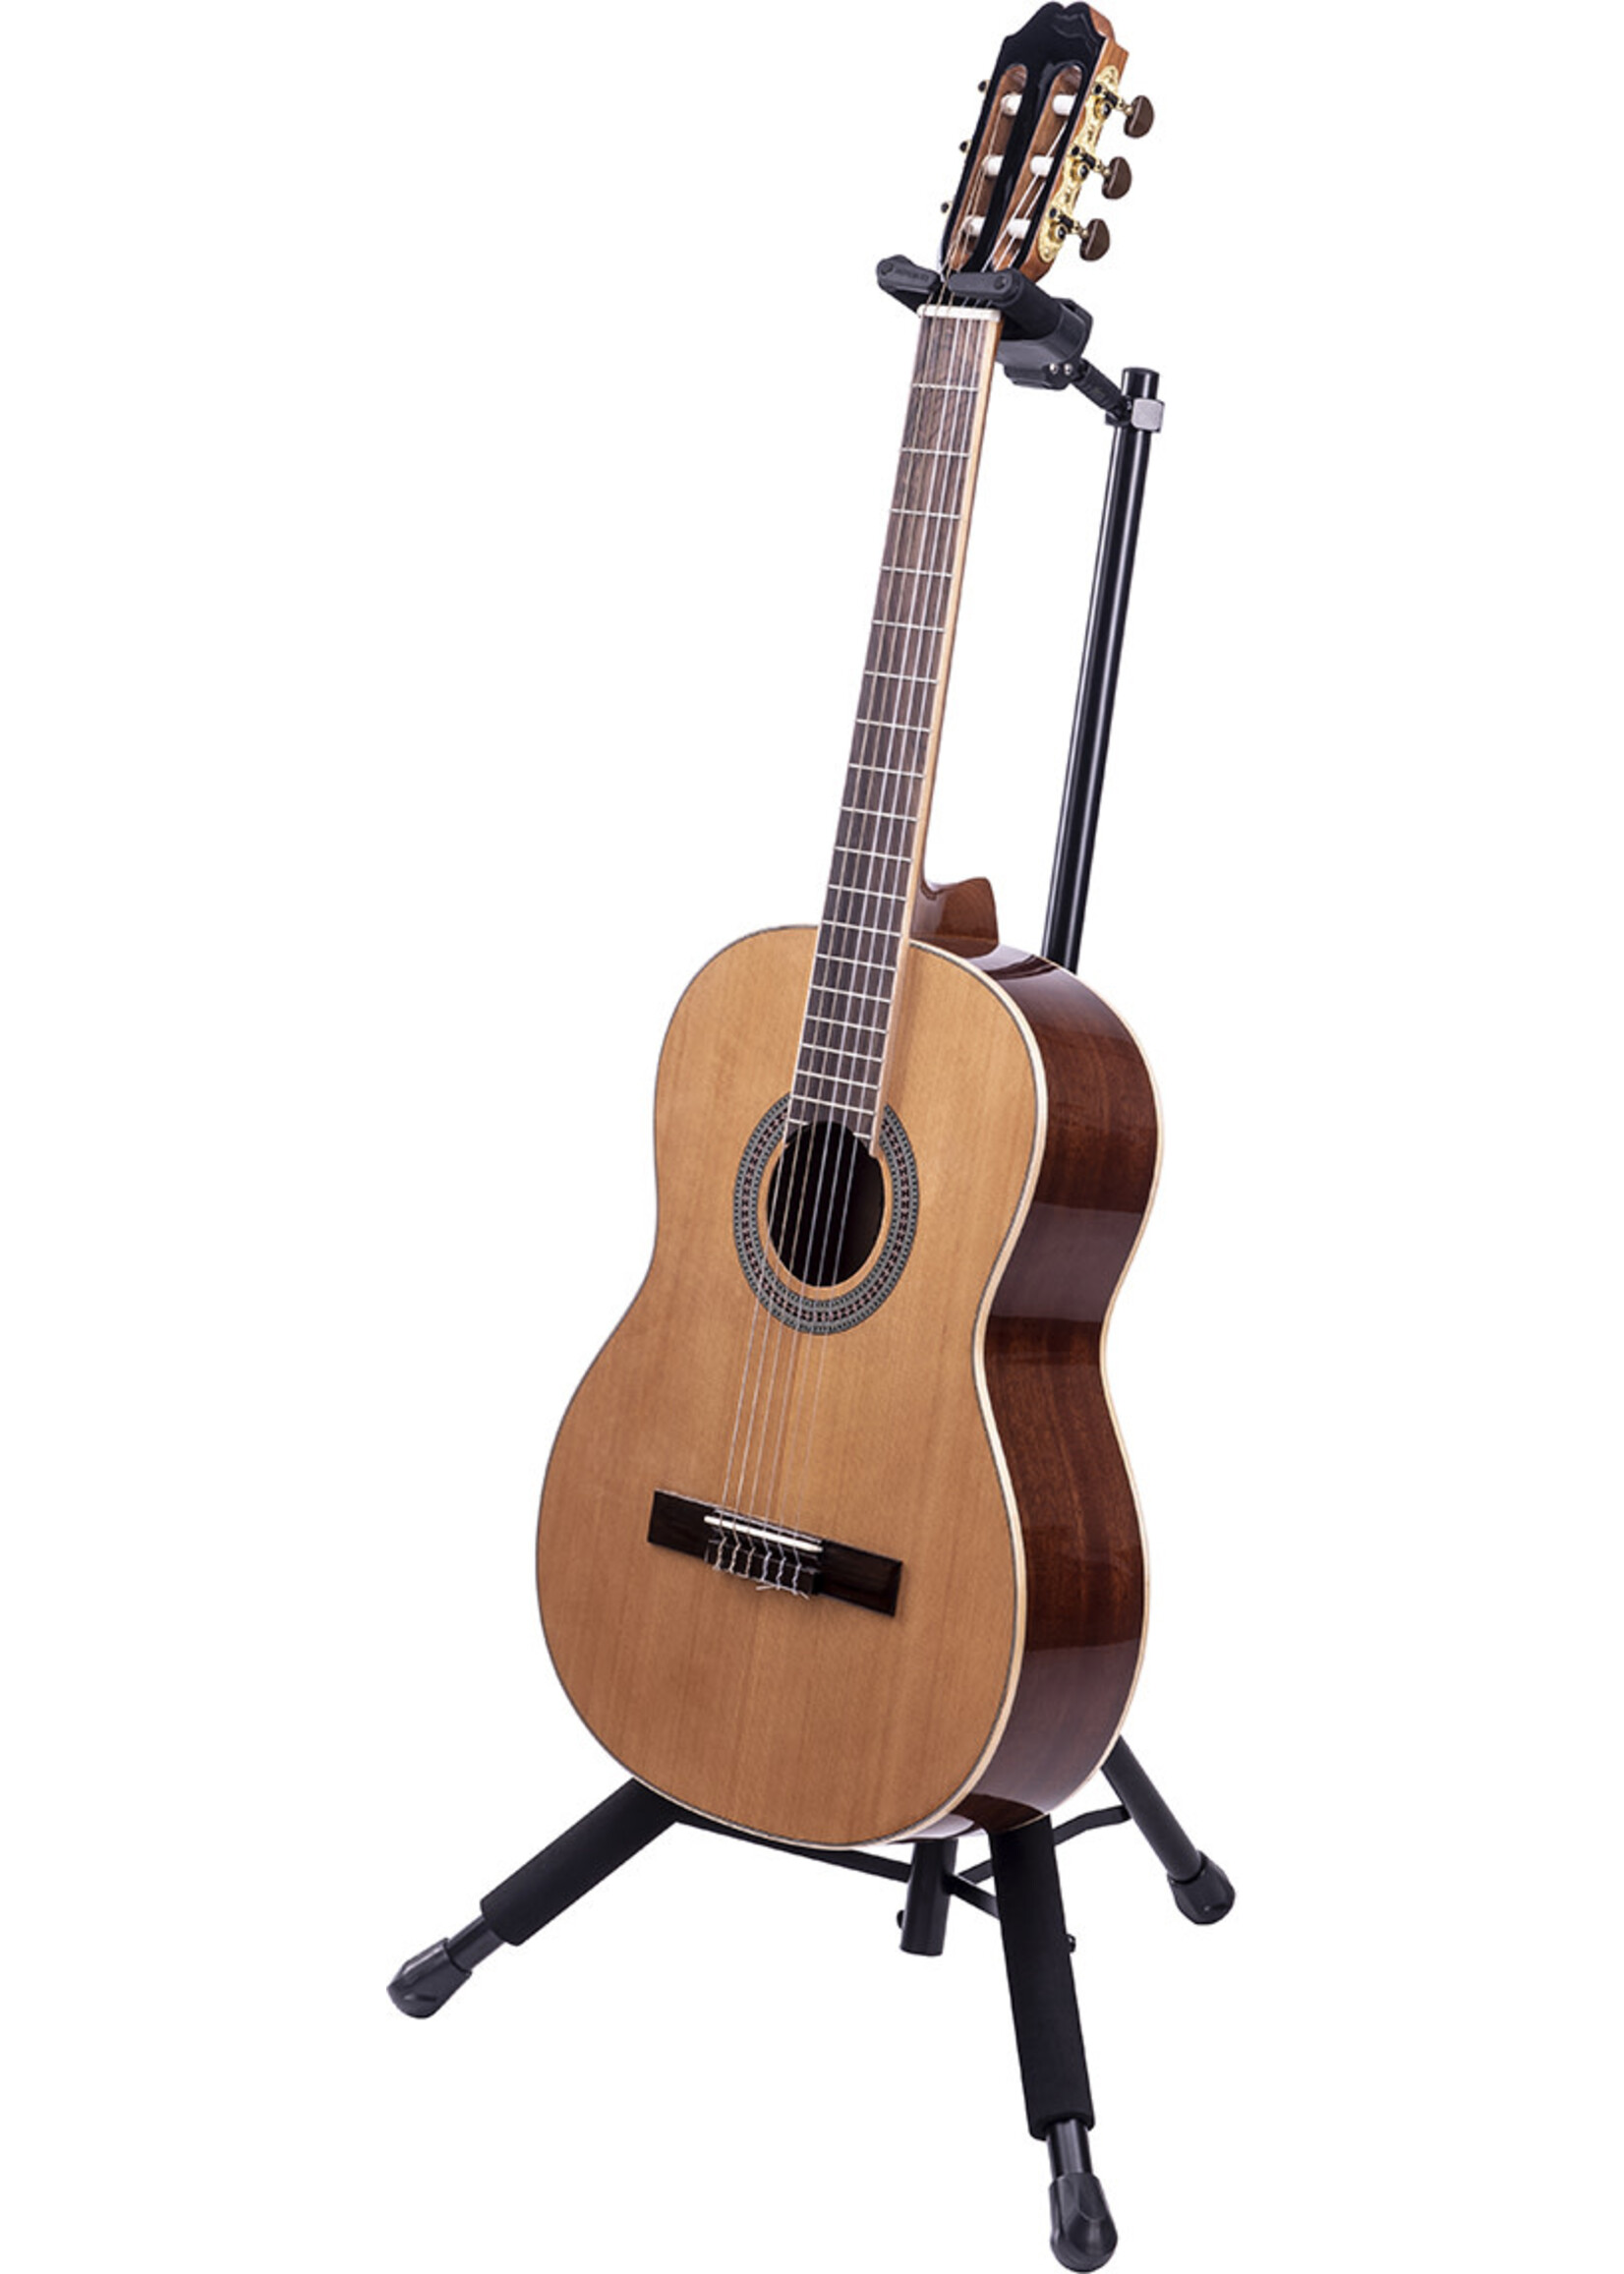 HERCULES STANDS SUPPORT GUITARE GS415B-PLUS